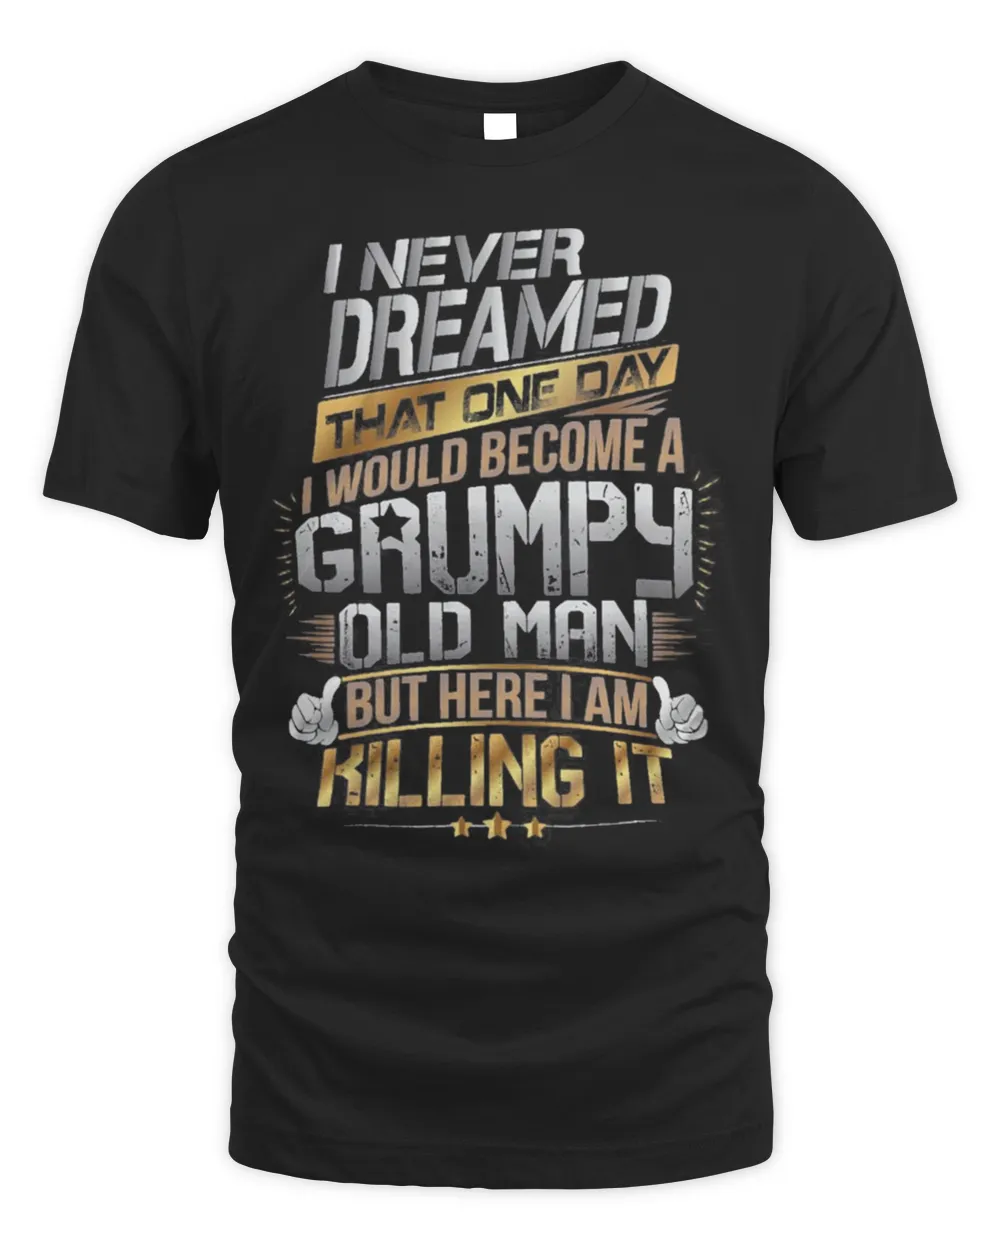 I Never Dreamed That One Day I’d Become A Grumpy Old Man But Here I Am Killing It Shirt